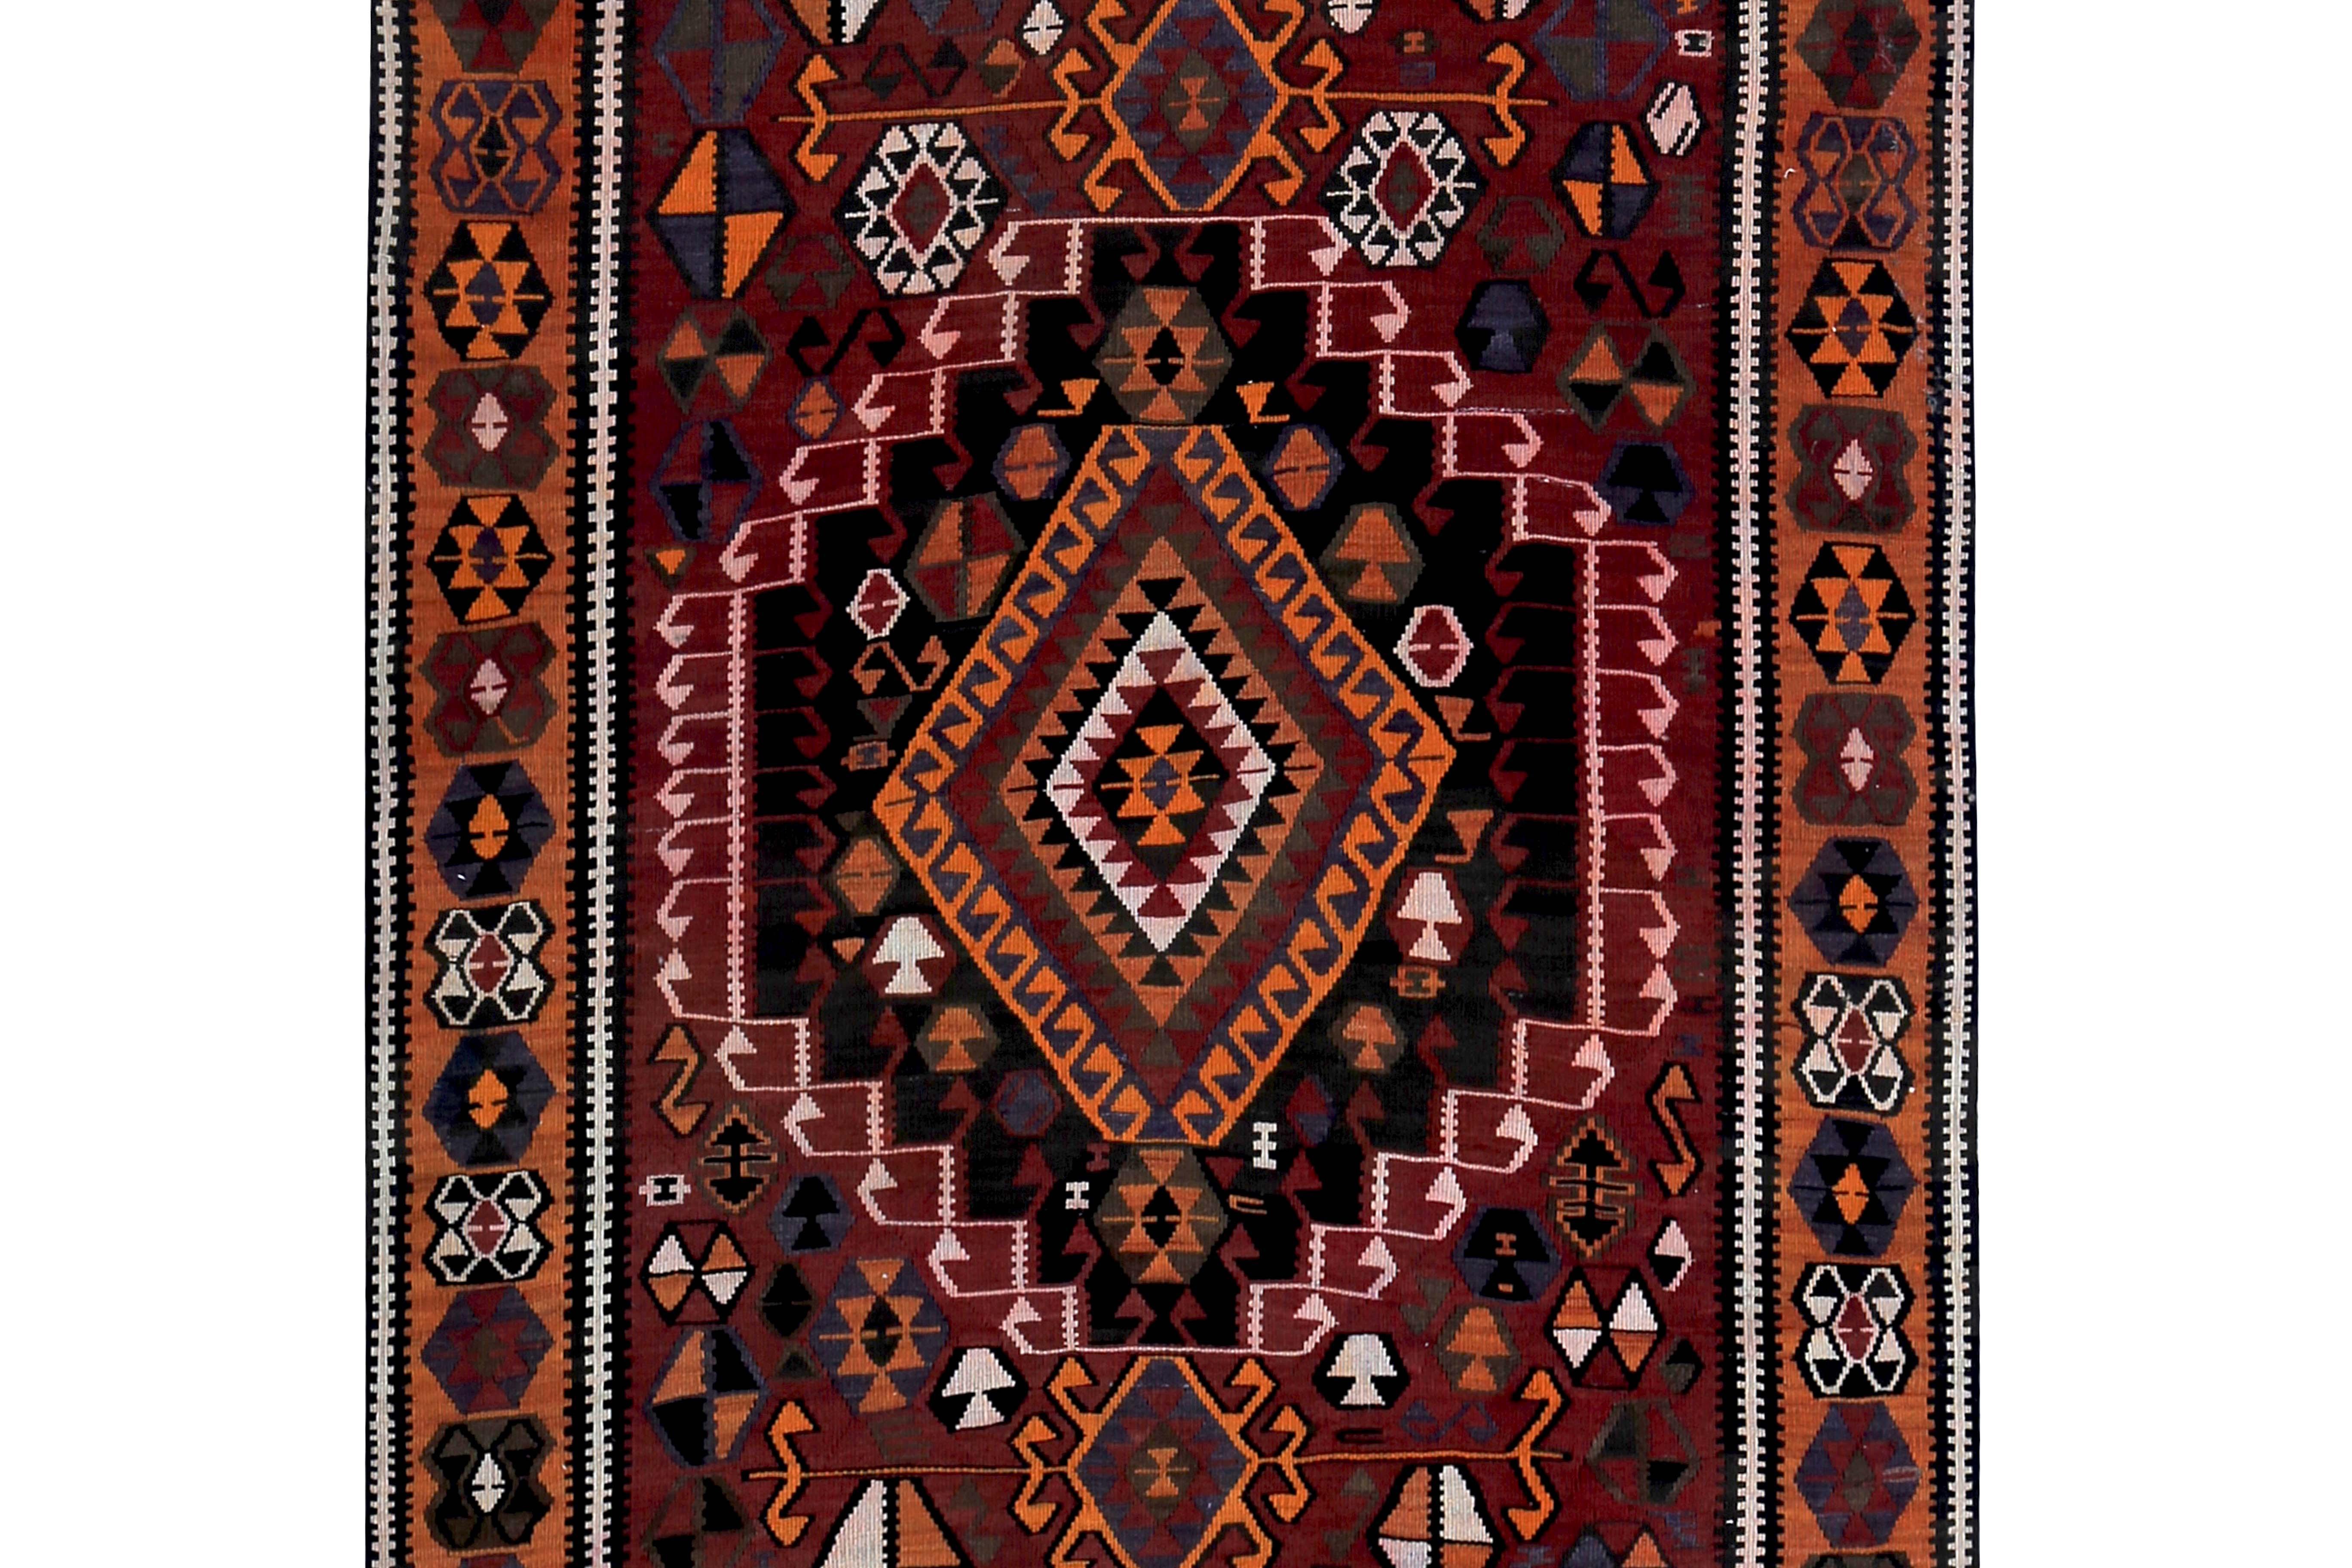 Hand-Woven Modern Turkish Kilim Runner Rug with Red, Orange and Brown Tribal Design For Sale